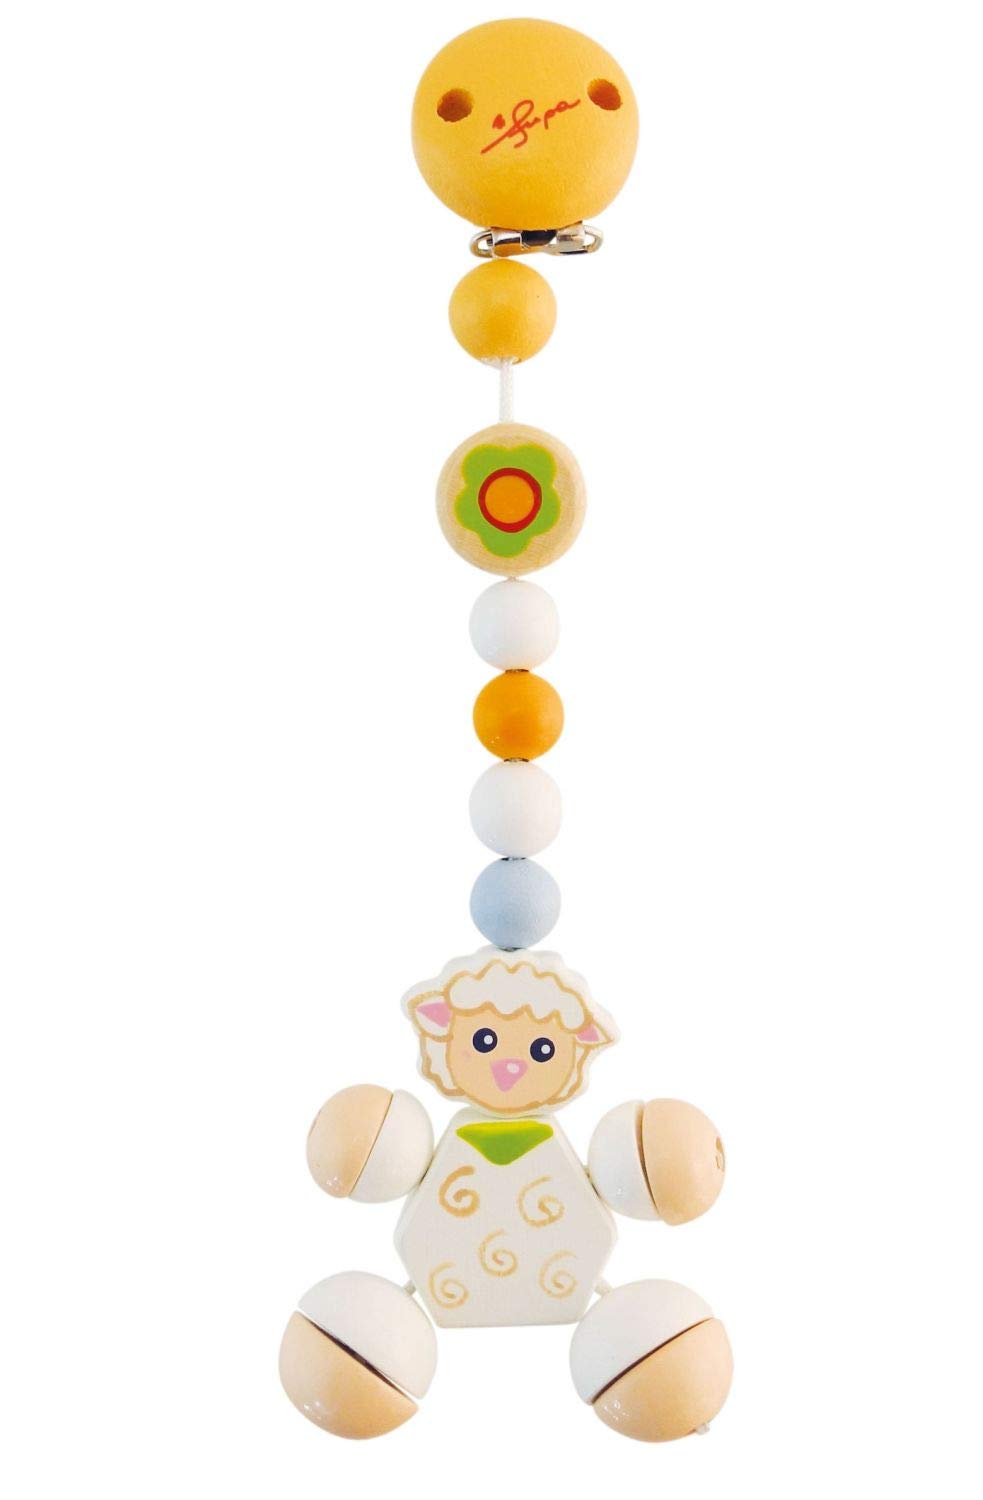 Bieco Betty 44011003 Wooden Clip Pendant with Betty the Sheep as Pendant, for Playing and Grasping for Children from Birth White